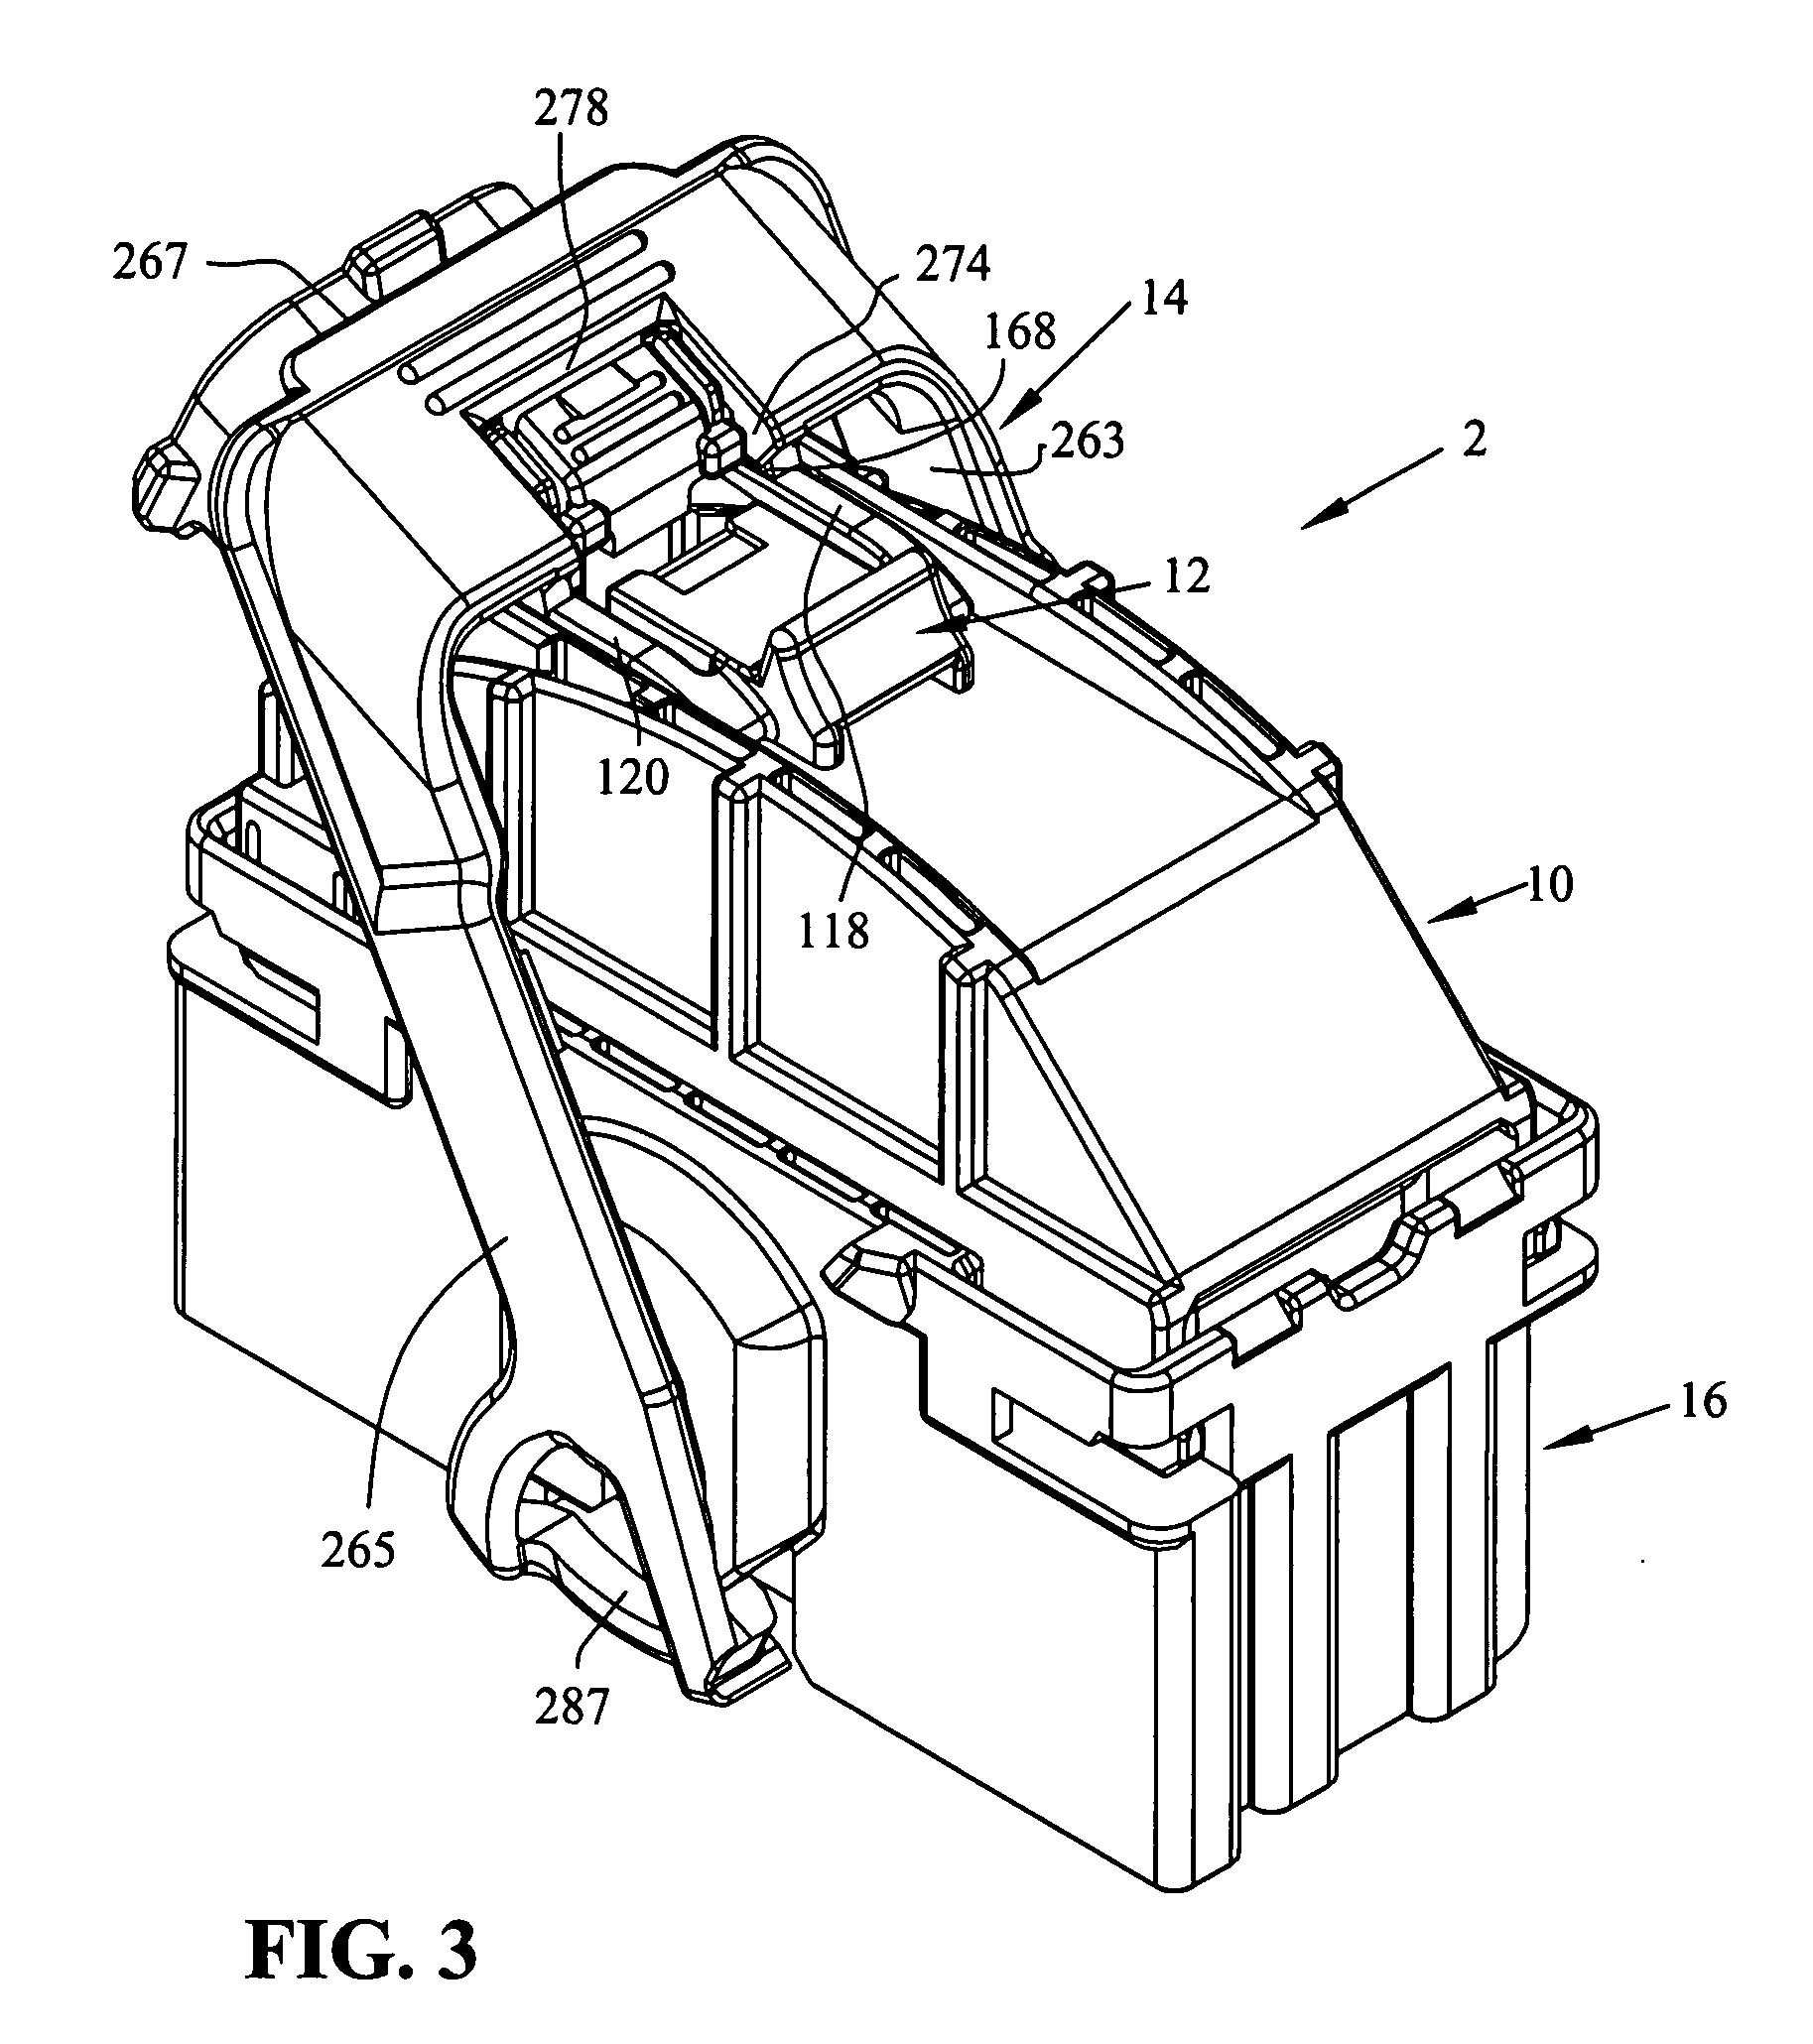 Lever mated connector assembly with a latching and overstress mechanism